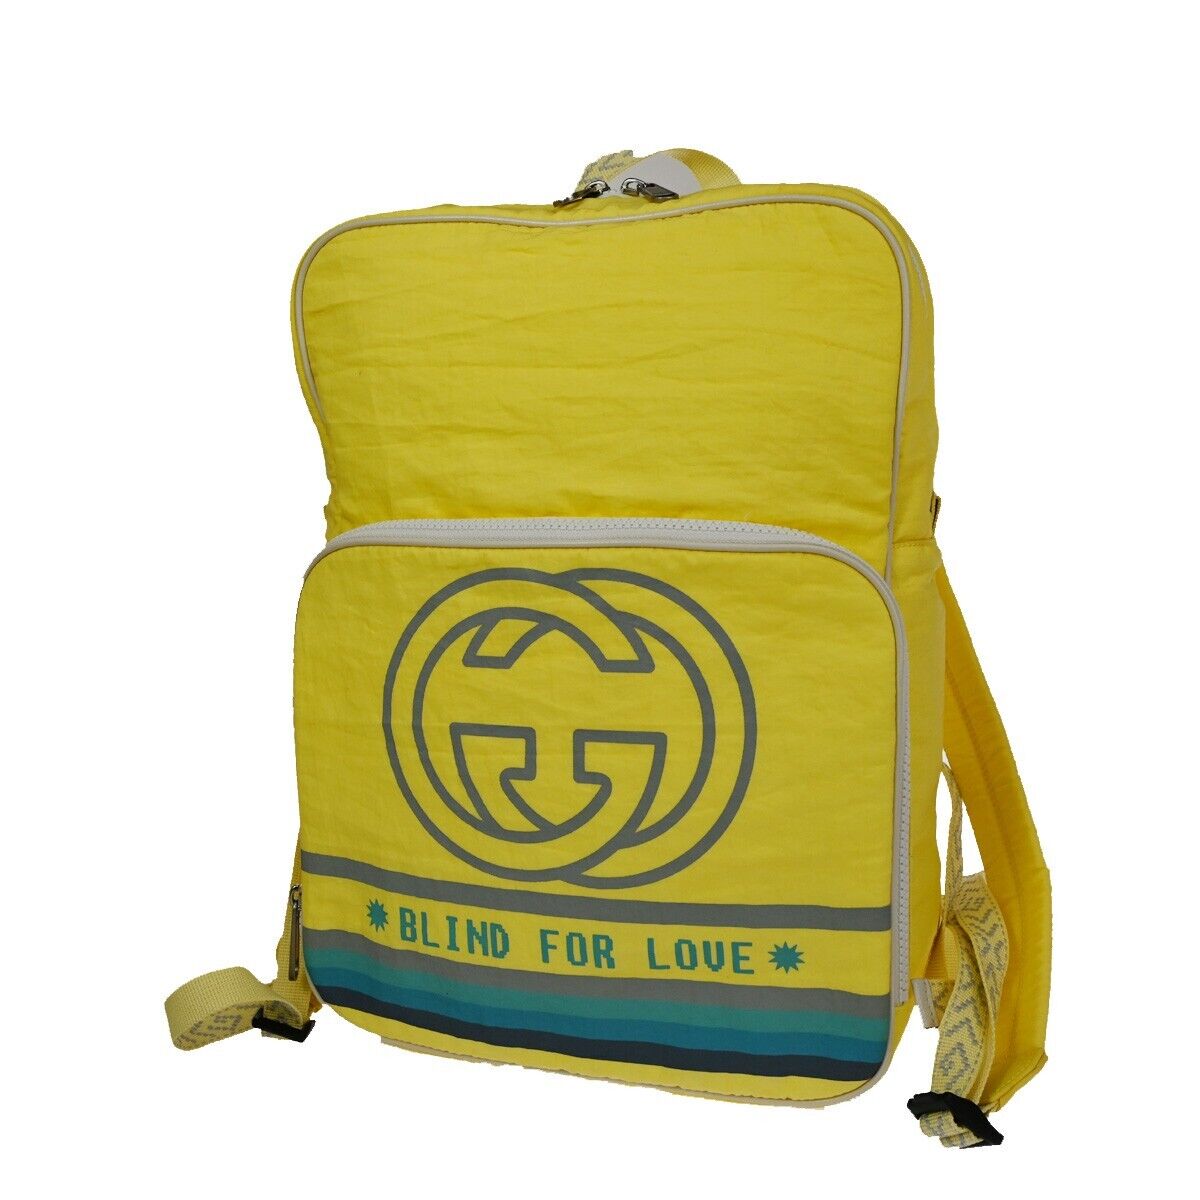 Gucci Blind For Love Yellow Synthetic Backpack Bag ()